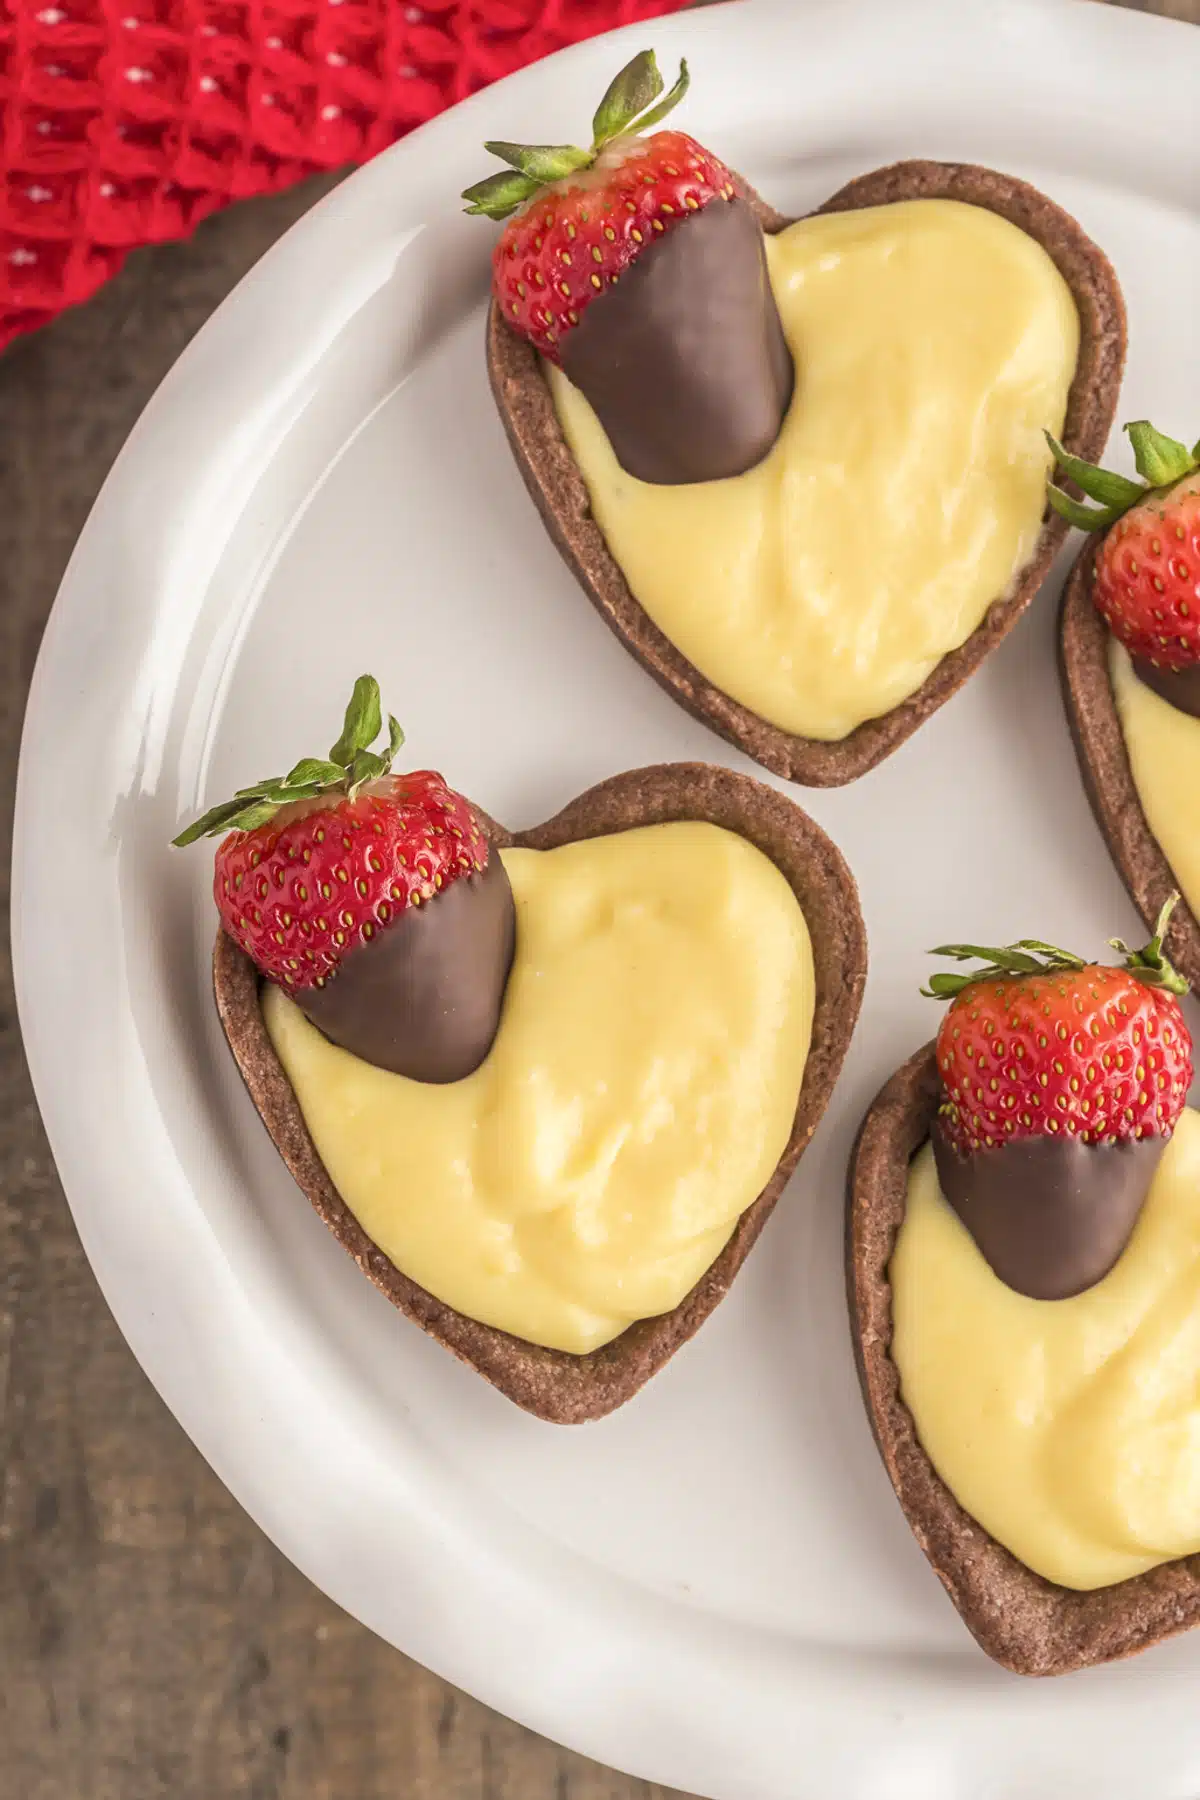 Chocolate covered strawberry Italian valentine's day tarts on a white plate.